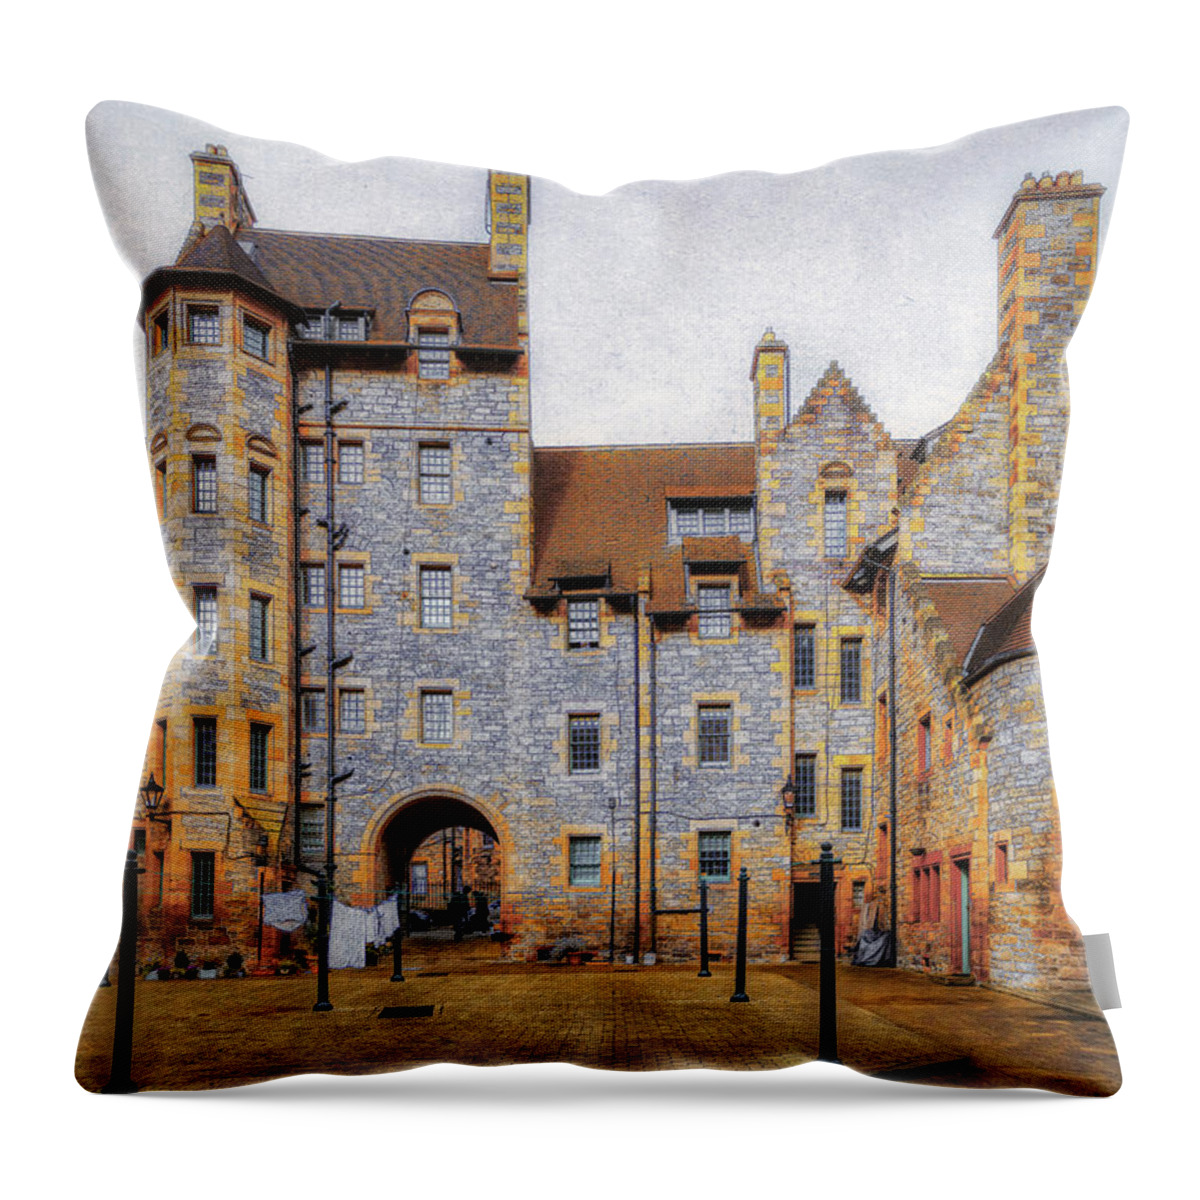 Scratched Throw Pillow featuring the photograph Scratched Court by Micah Offman